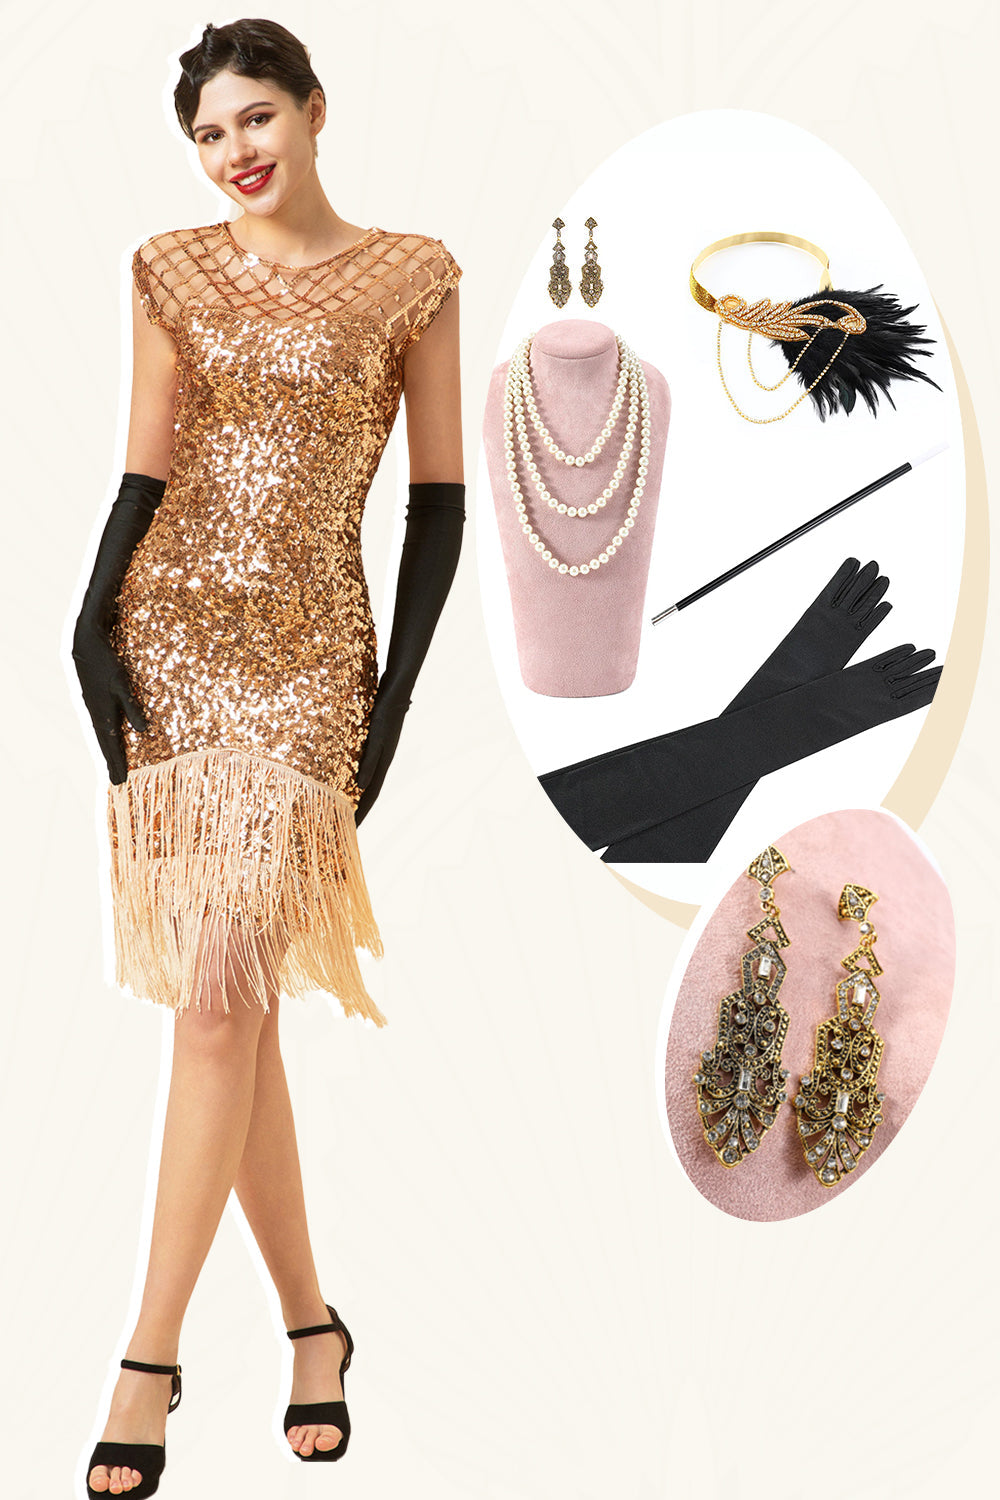 Pink Cap Sleeves Sequined Fringes 1920s Gatsby Flapper Dress with 20s Accessories Set